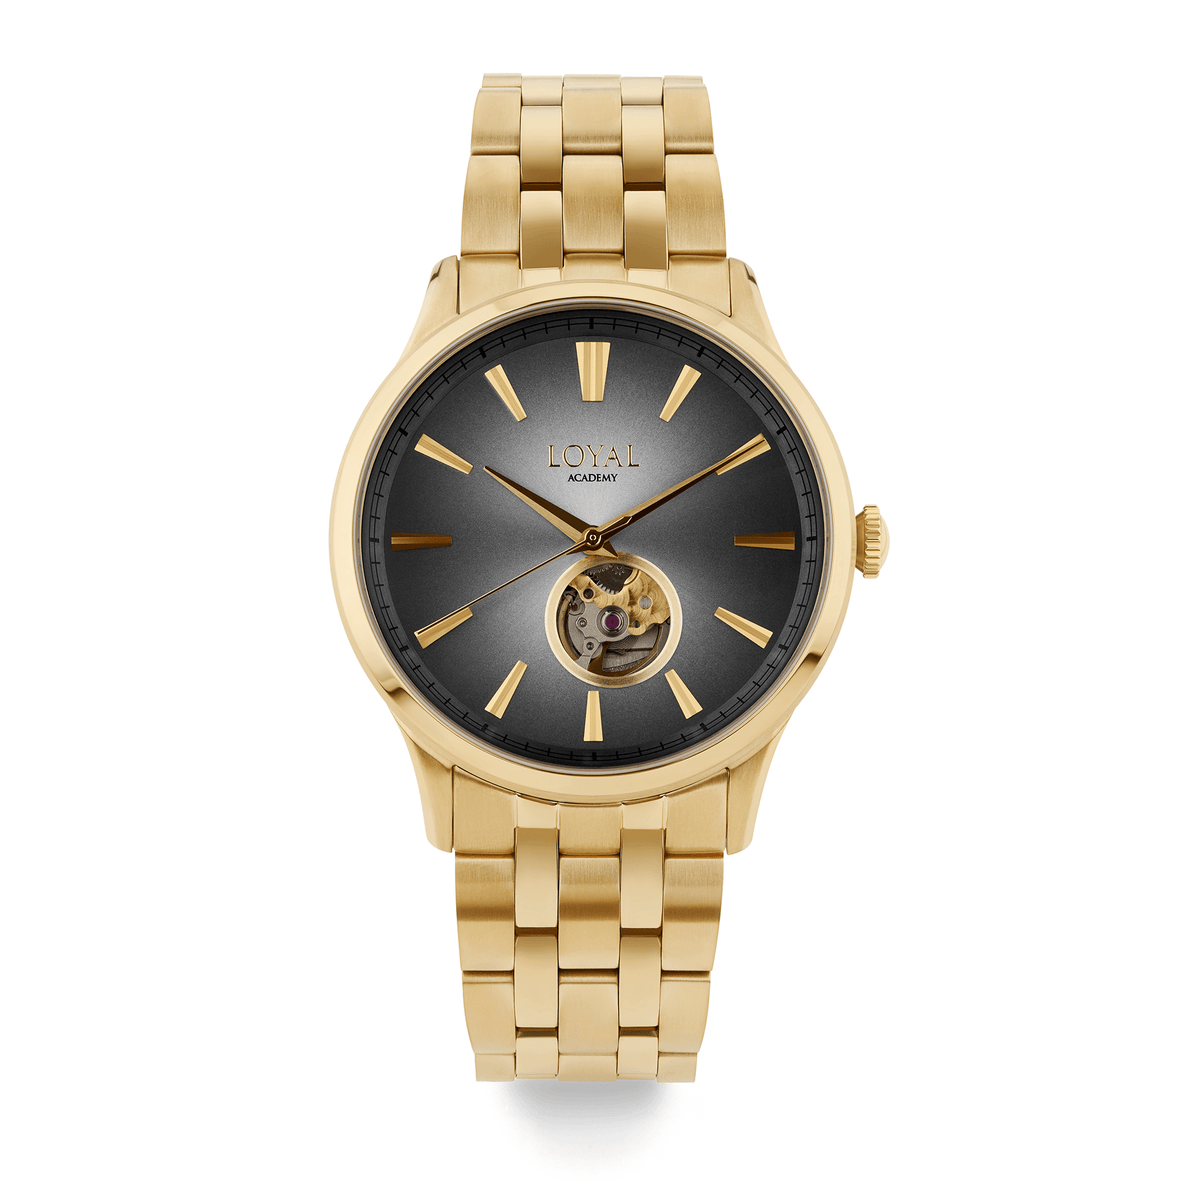 Loyal Academy Men's 42.20mm Gold Plated Automatic Watch - Wallace Bishop